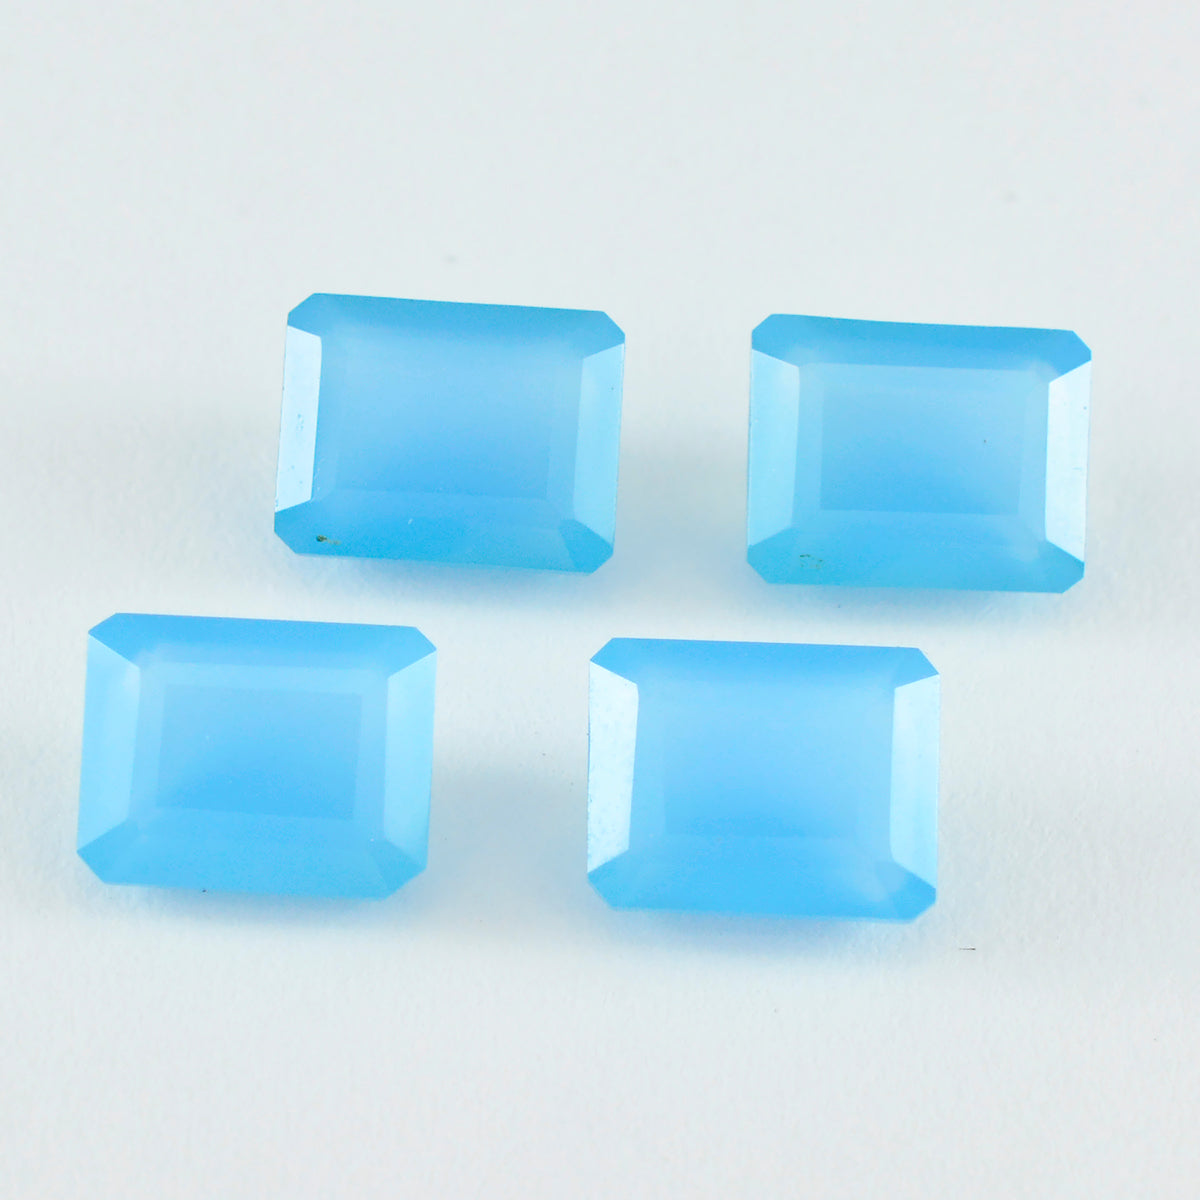 Riyogems 1PC Natural Blue Chalcedony Faceted 9x11 mm Octagon Shape superb Quality Loose Stone